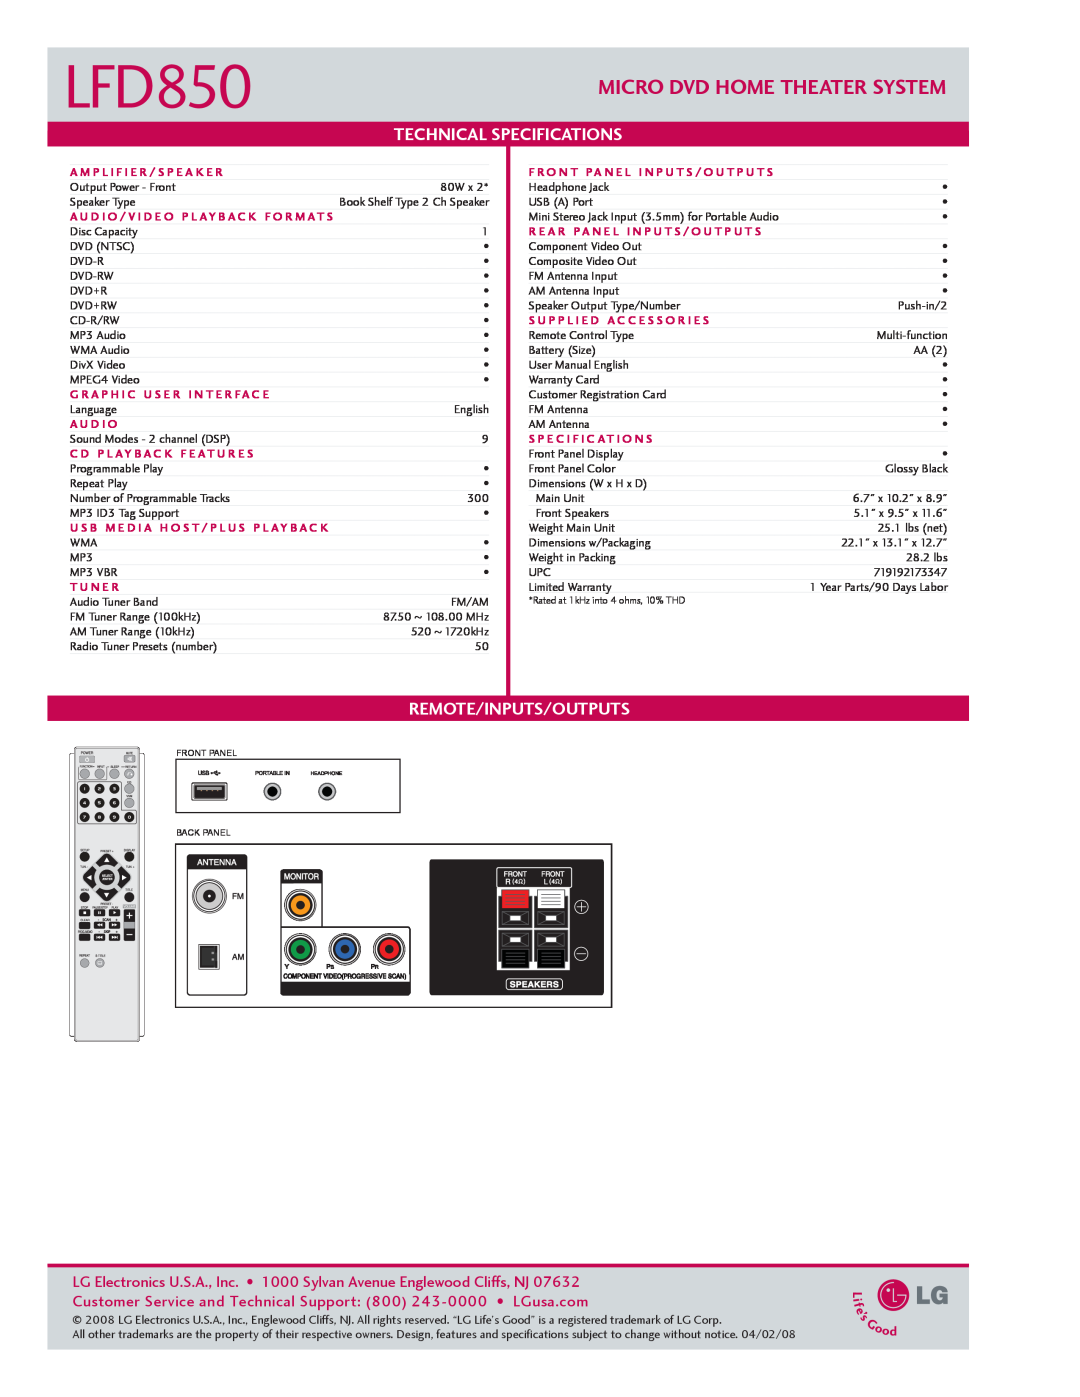 LG Electronics LFD850 manual Micro DVD Home Theater System, Technical Specifications, Remote/Inputs/Outputs 